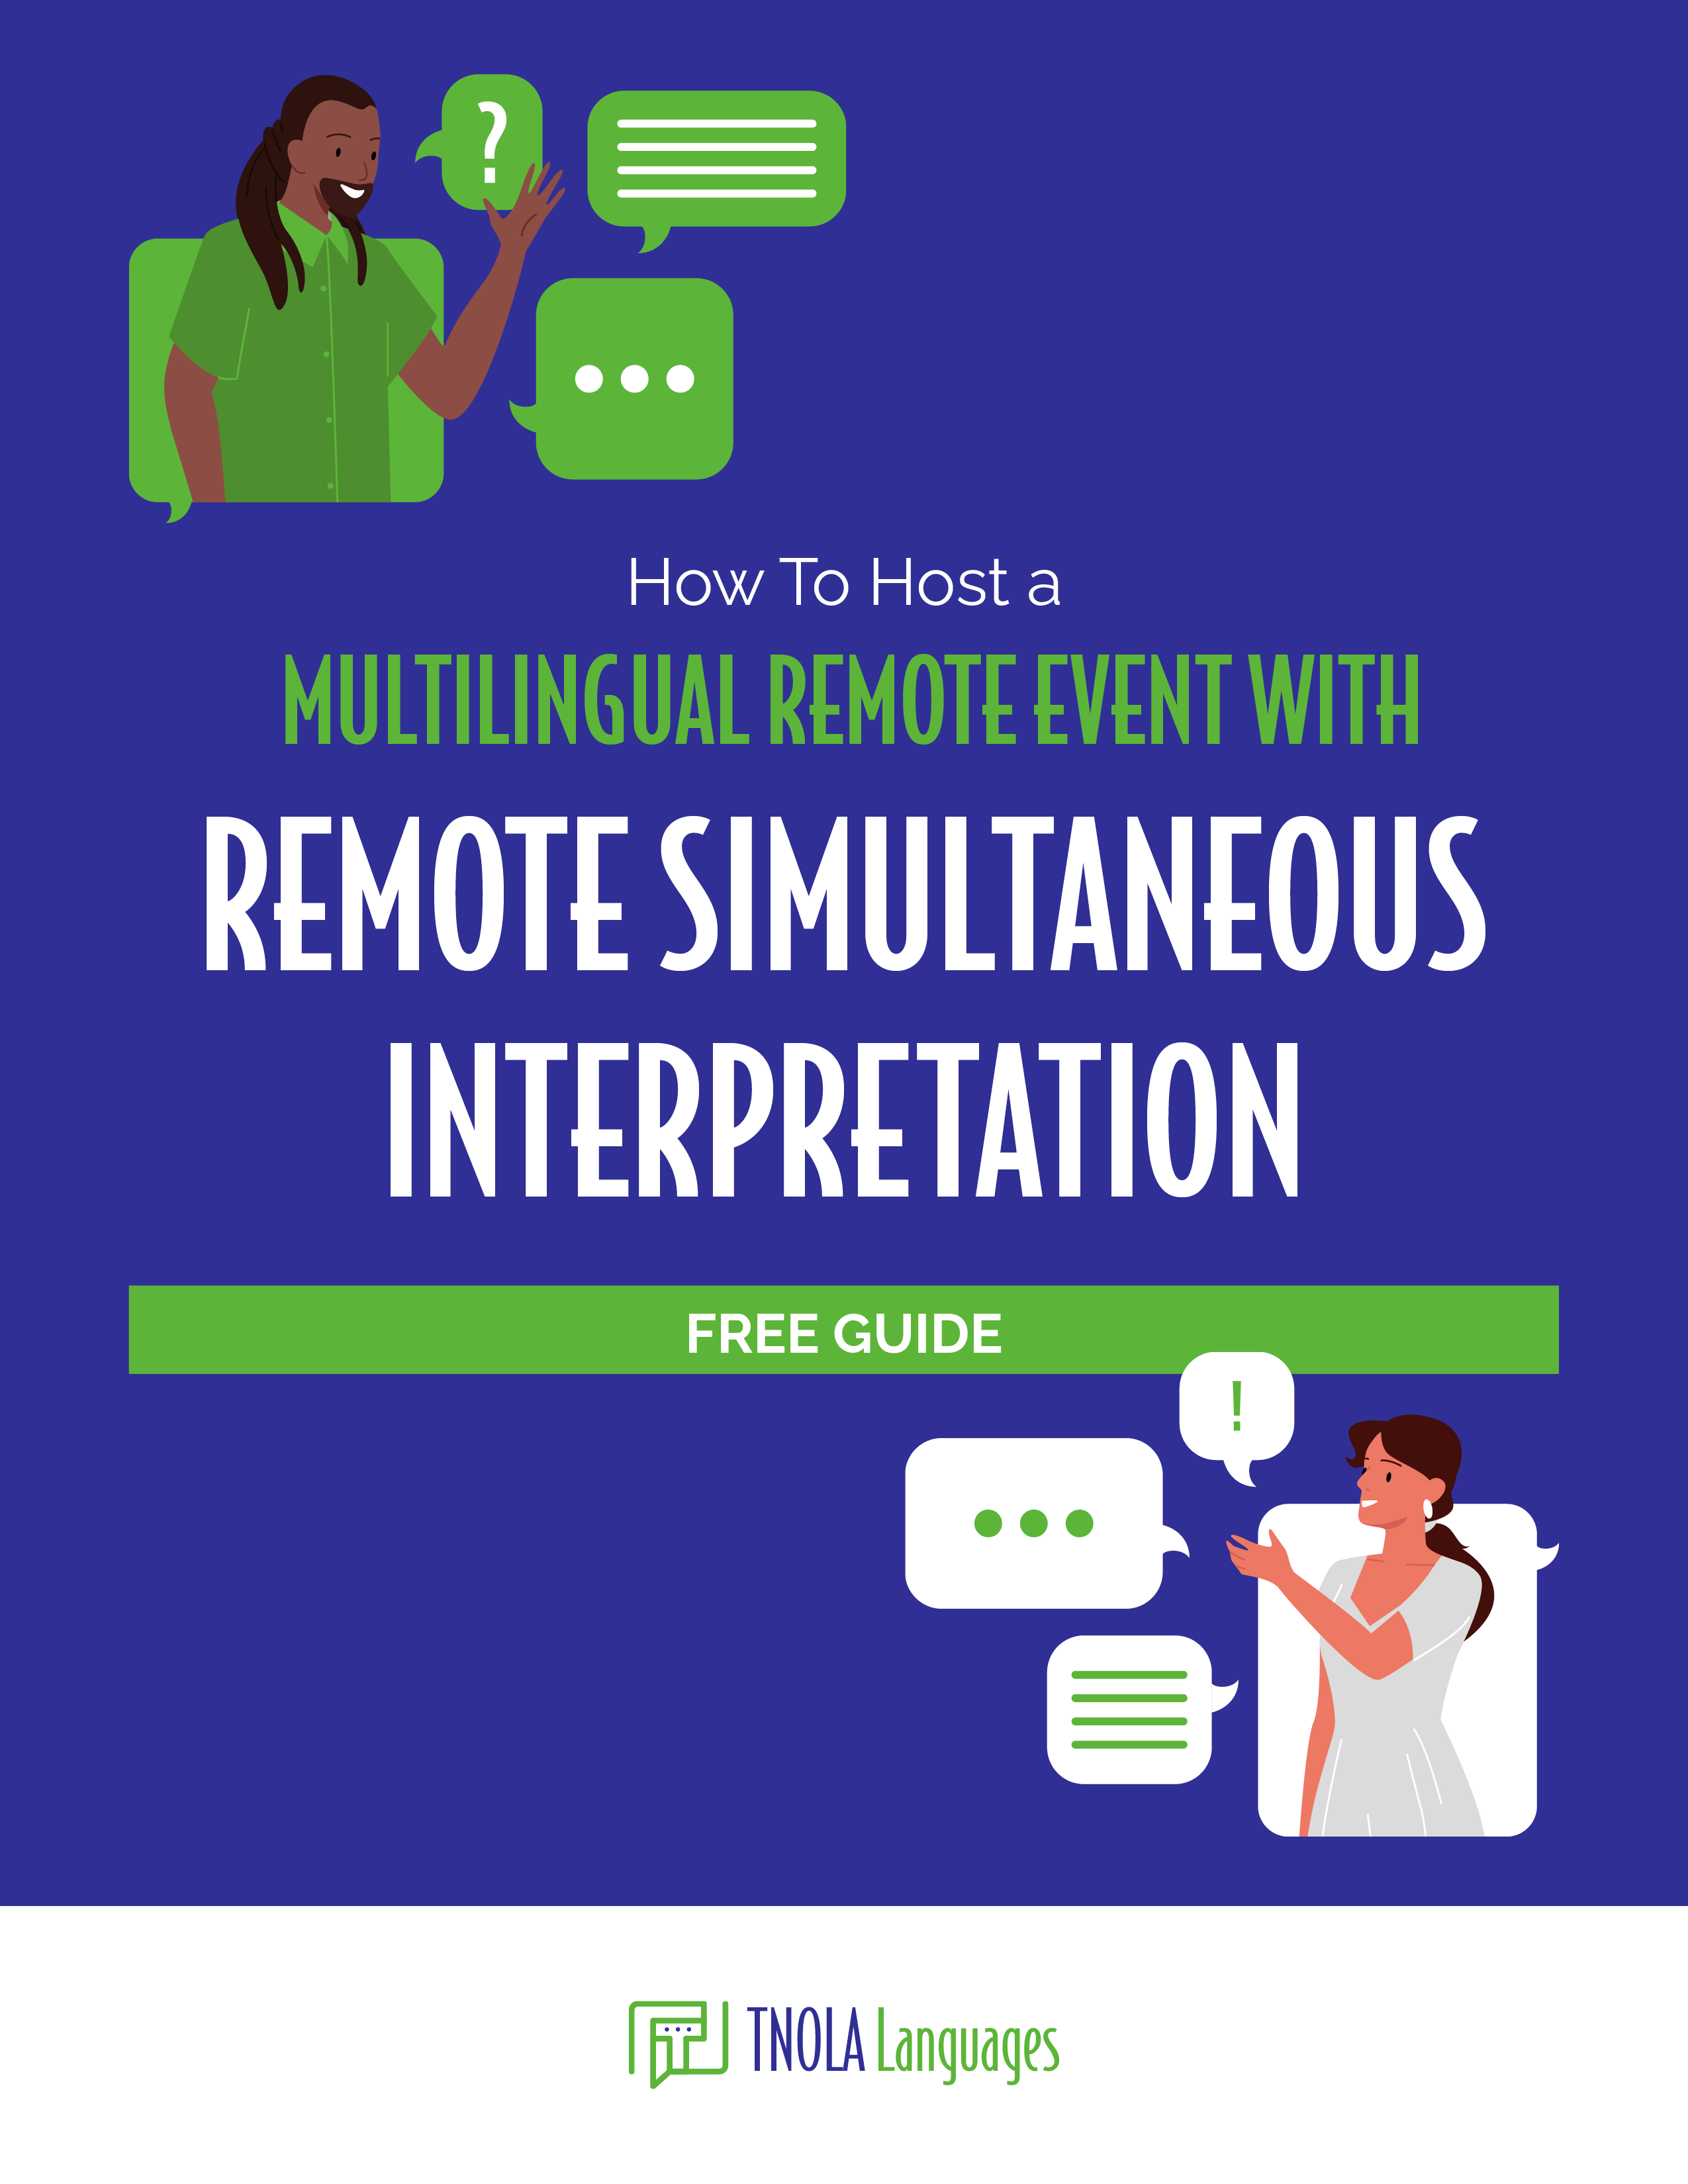 How To Host a Multilingual Remote Event With Remote Simultaneous Interpretation